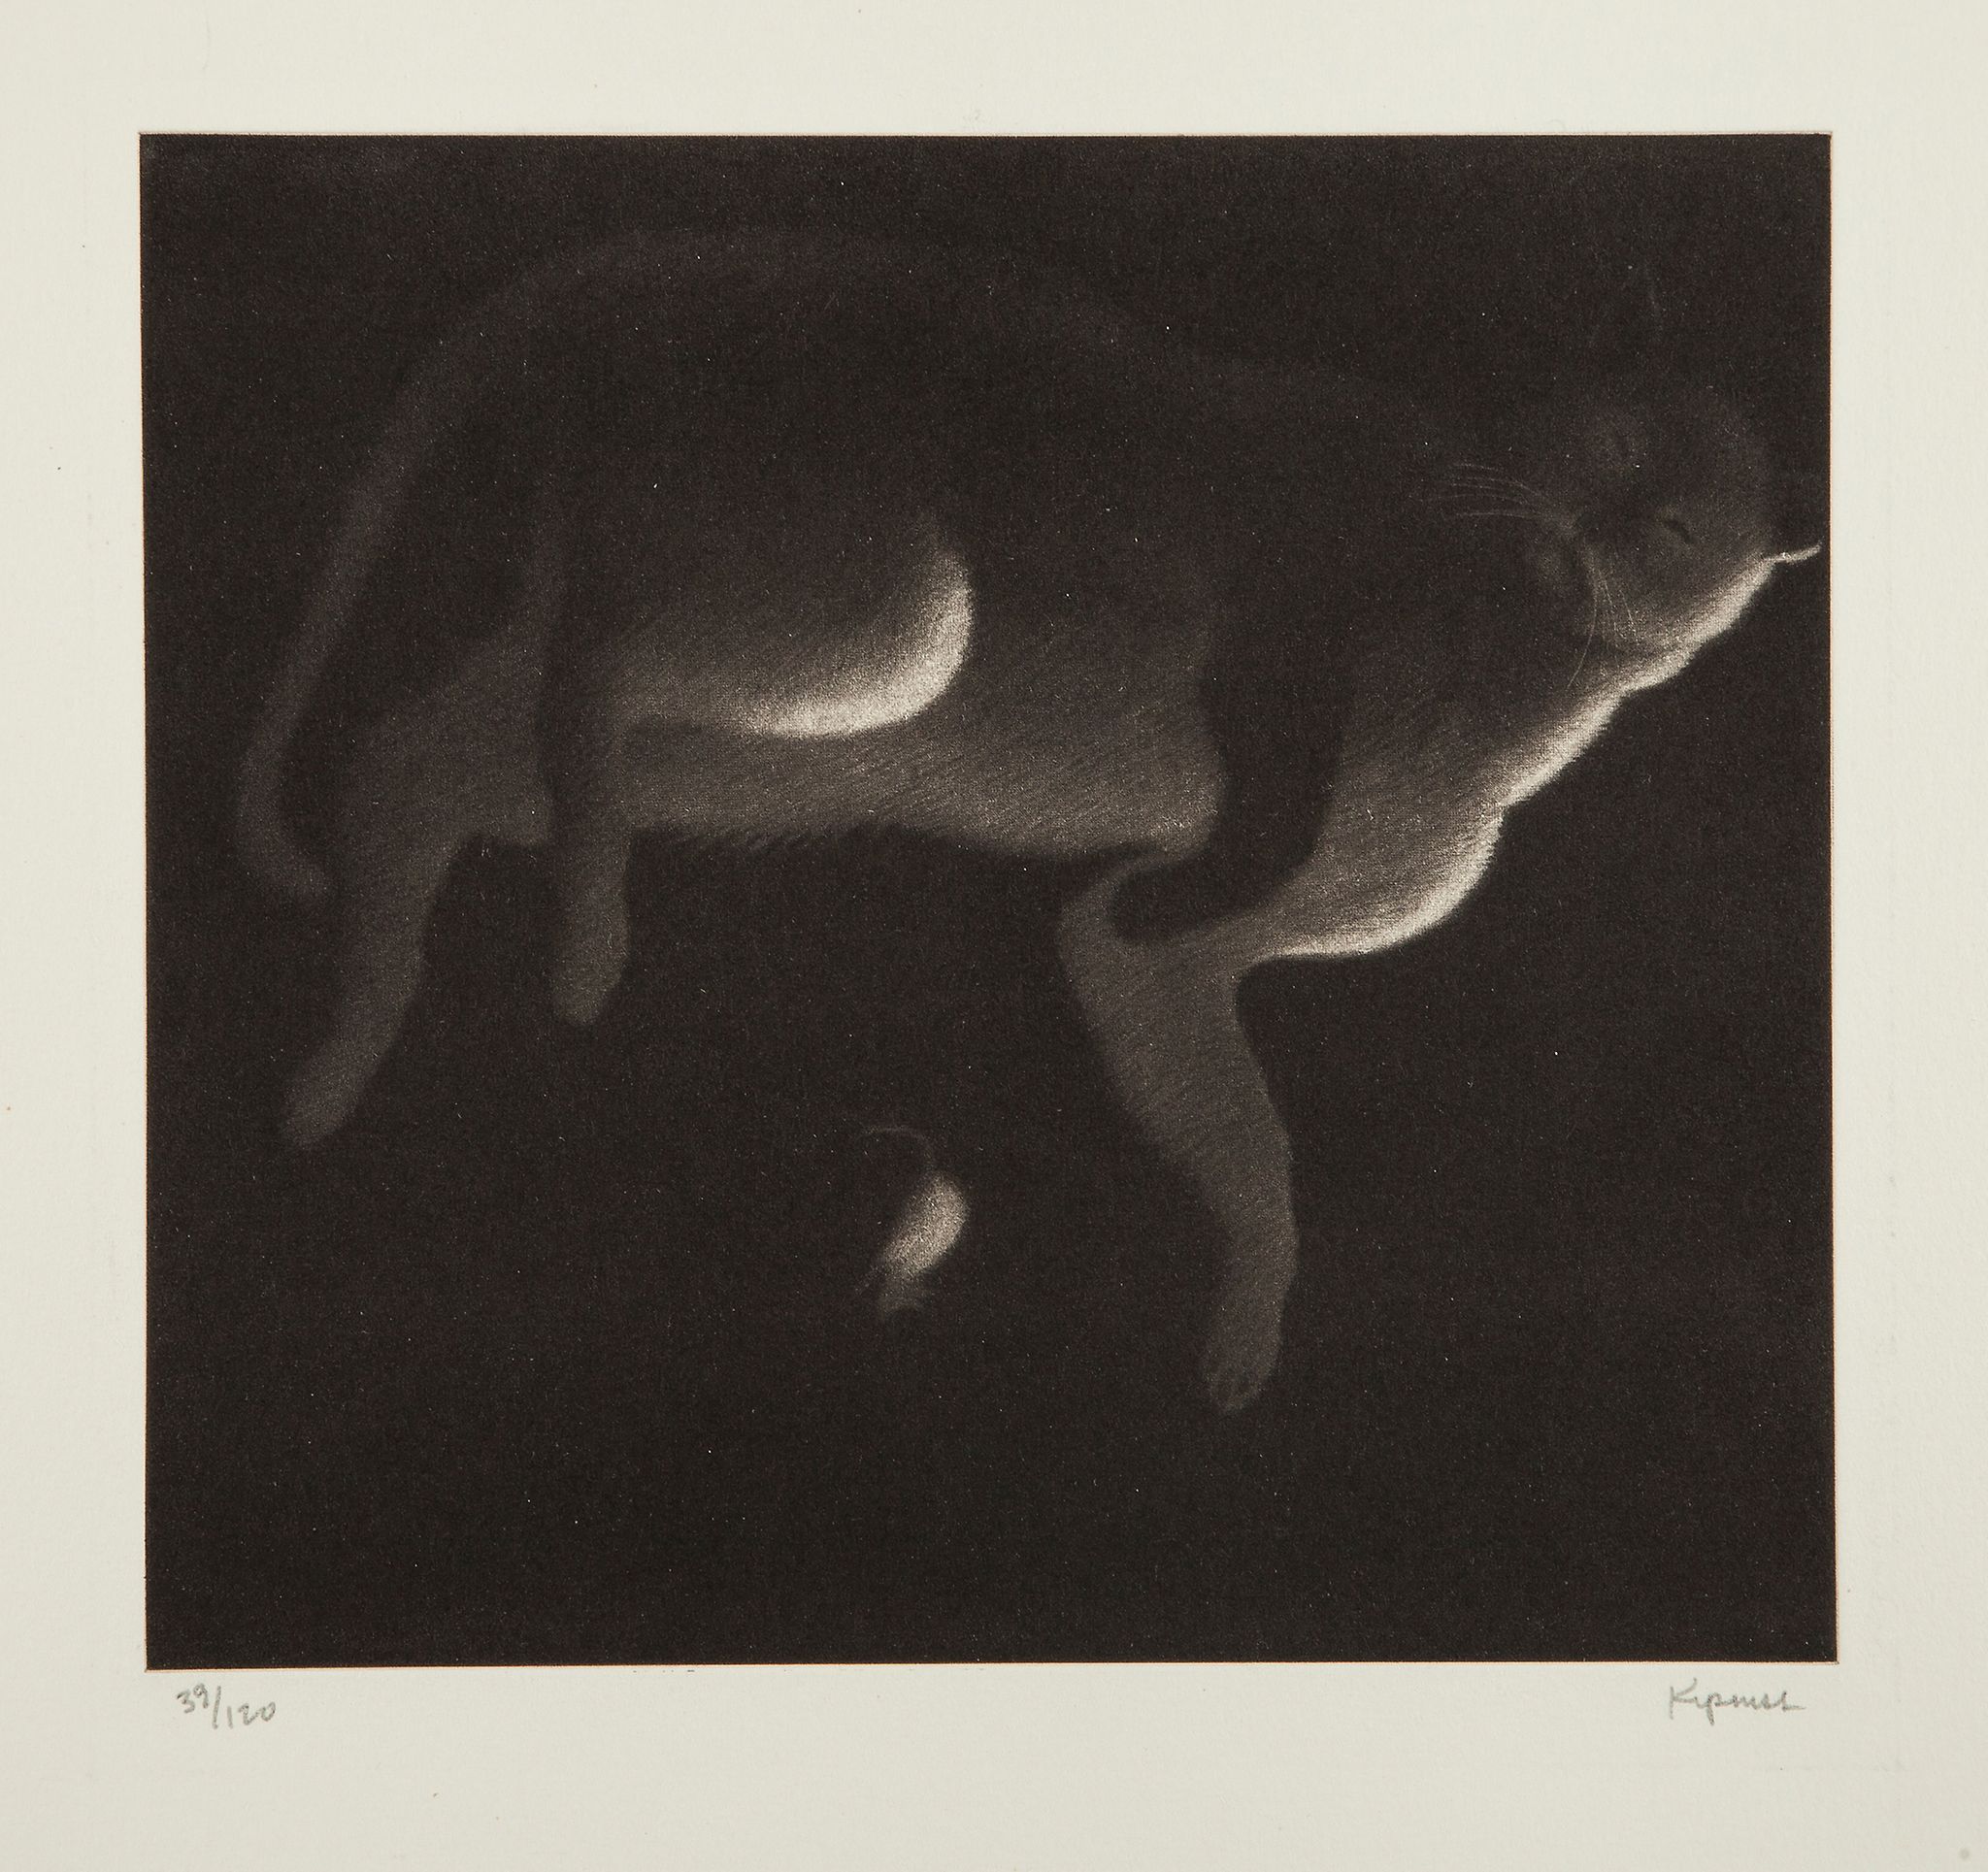 Kipniss (Robert, b.1931) - Cat and mouse, "Lucille"   mezzotint on cream wove paper, signed in